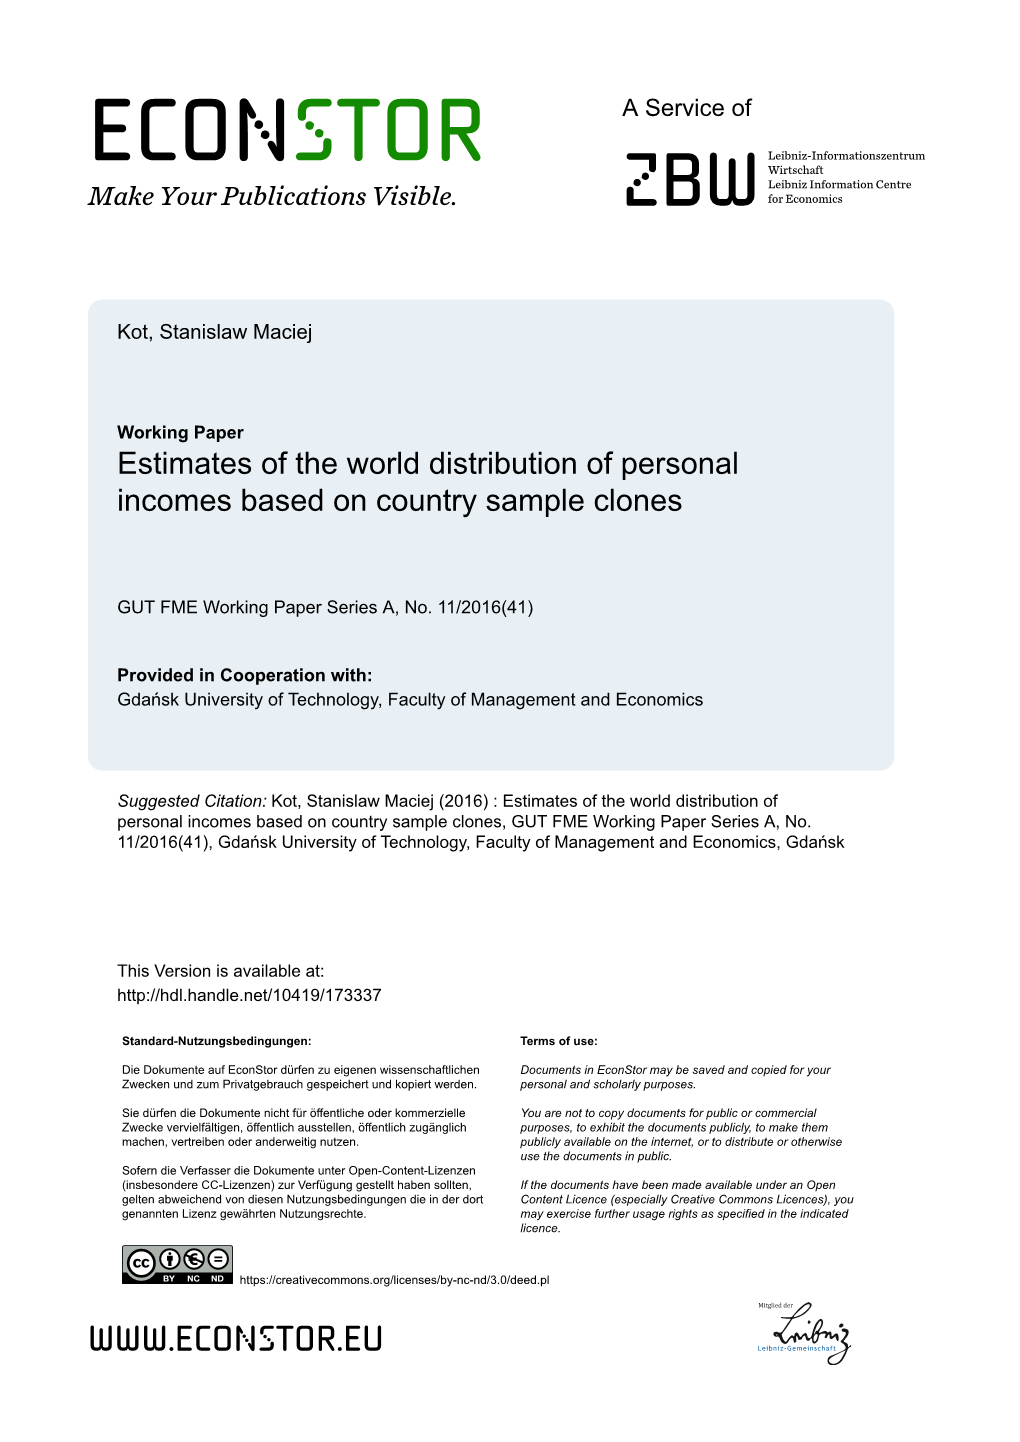 Estimates of the World Distribution of Personal Incomes Based on Country Sample Clones